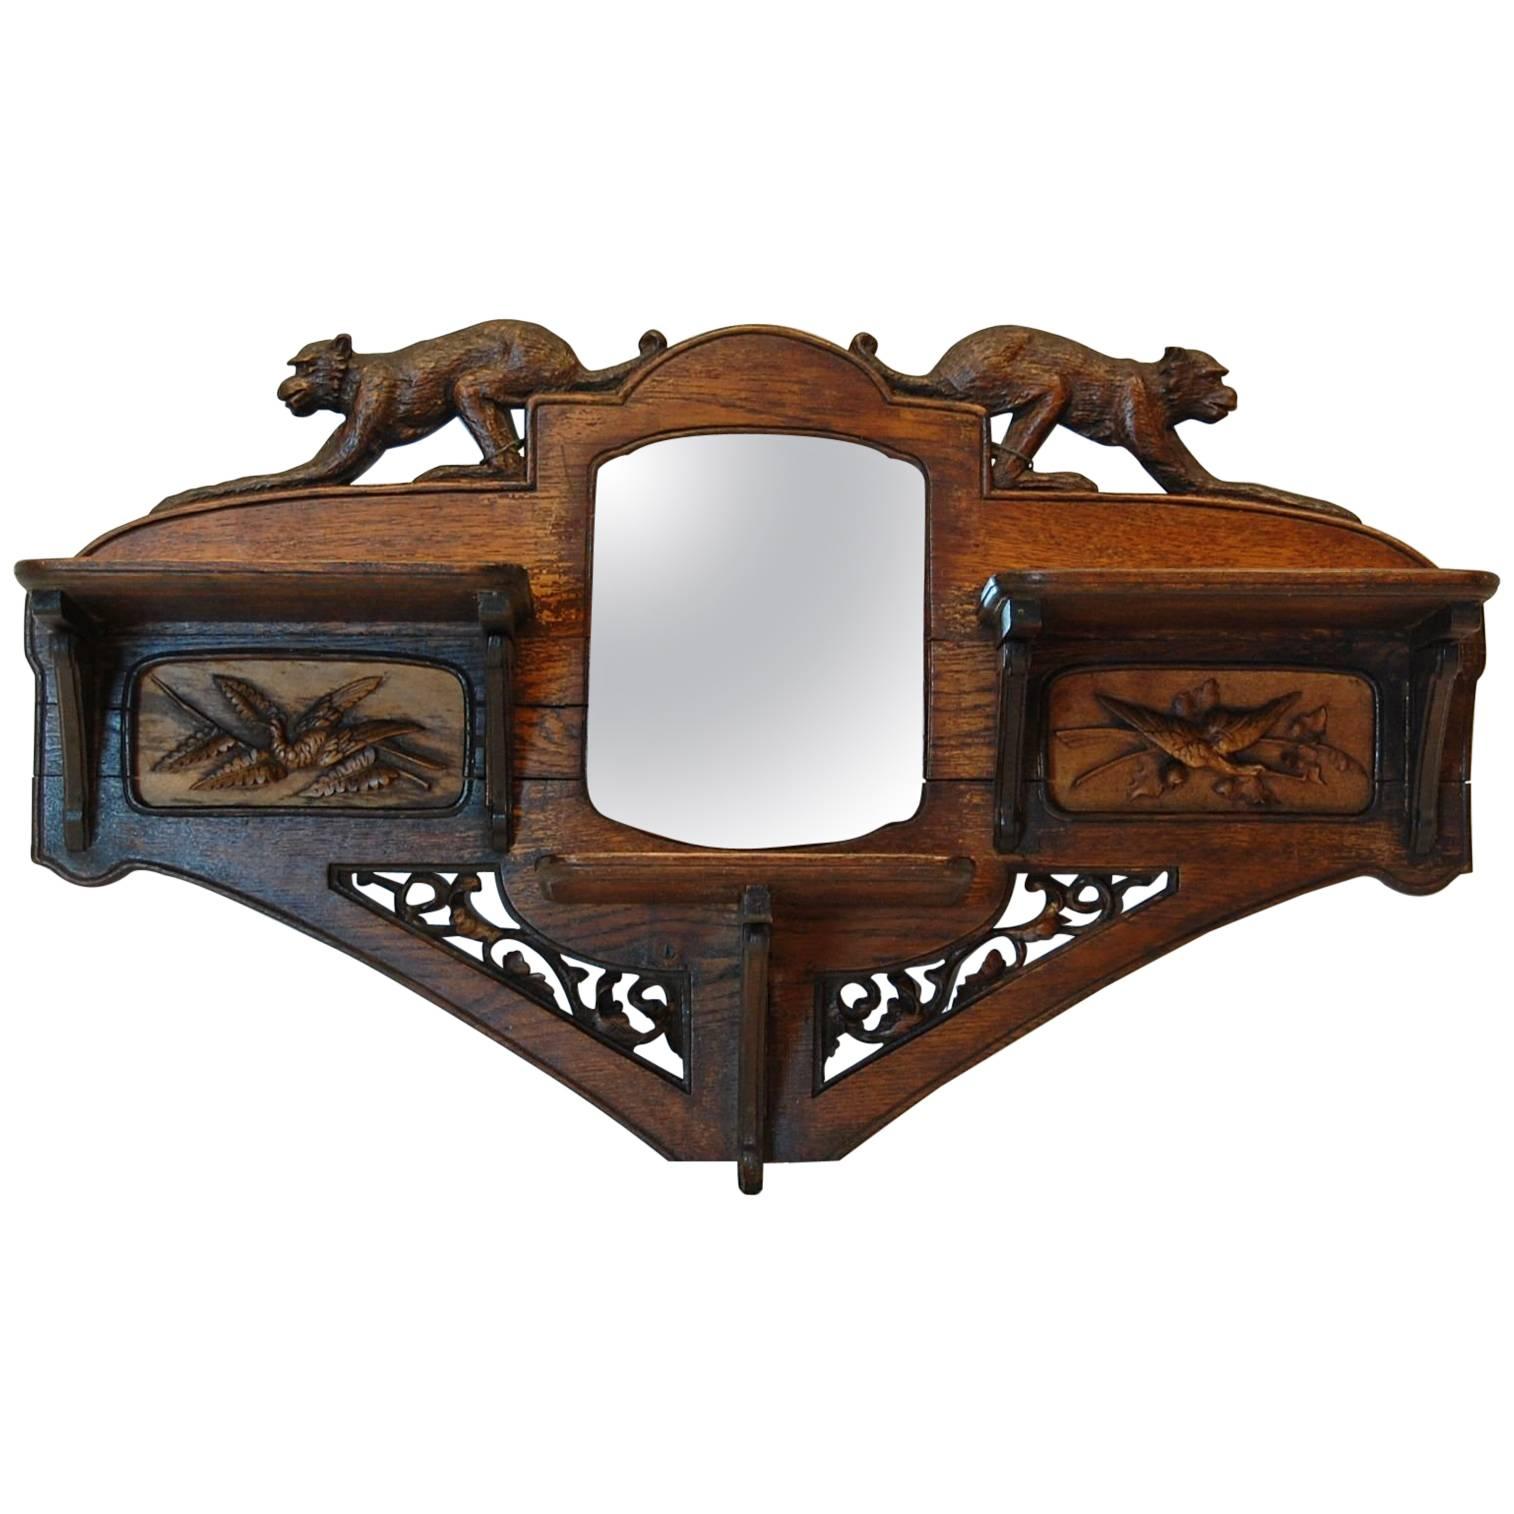 Carved Oakwood Wall-Mounted Shaving Mirror with Flip-Up Shelves, circa 1890